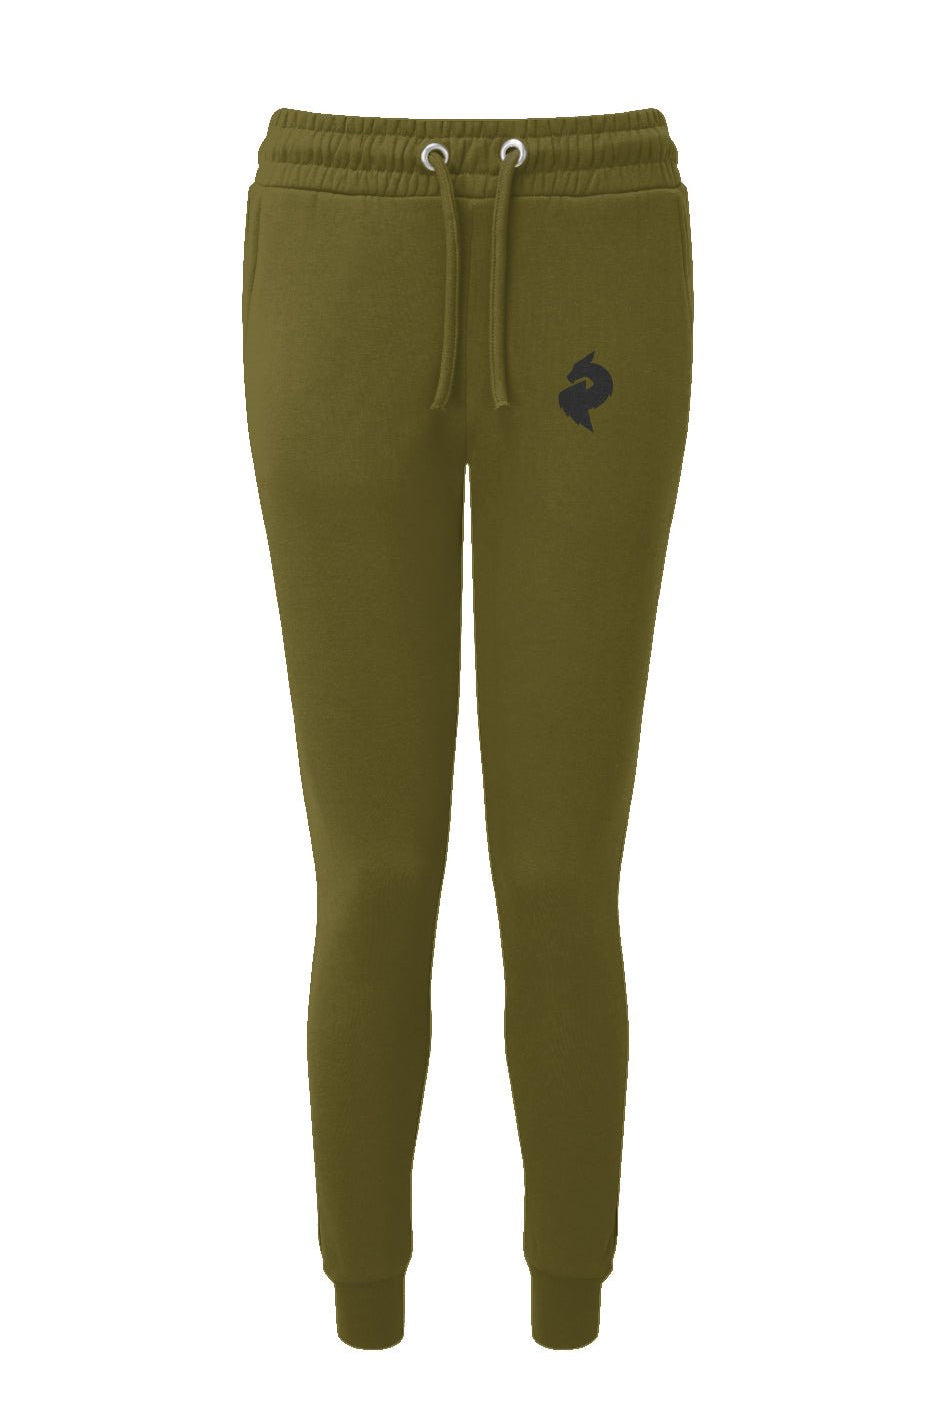 Dragon Foxx™ Women's Olive Yoga Fitted Jogger - Women's Yoga Fitted Jogger - Apliiq - Dragon Foxx™ Women's Olive Yoga Fitted Jogger - APQ-4378903S5A1 - xs - Olive - Dragon Foxx™ - Dragon Foxx™ Olive Jogger - Dragon Foxx™ Olive Yoga Fitted Jogger